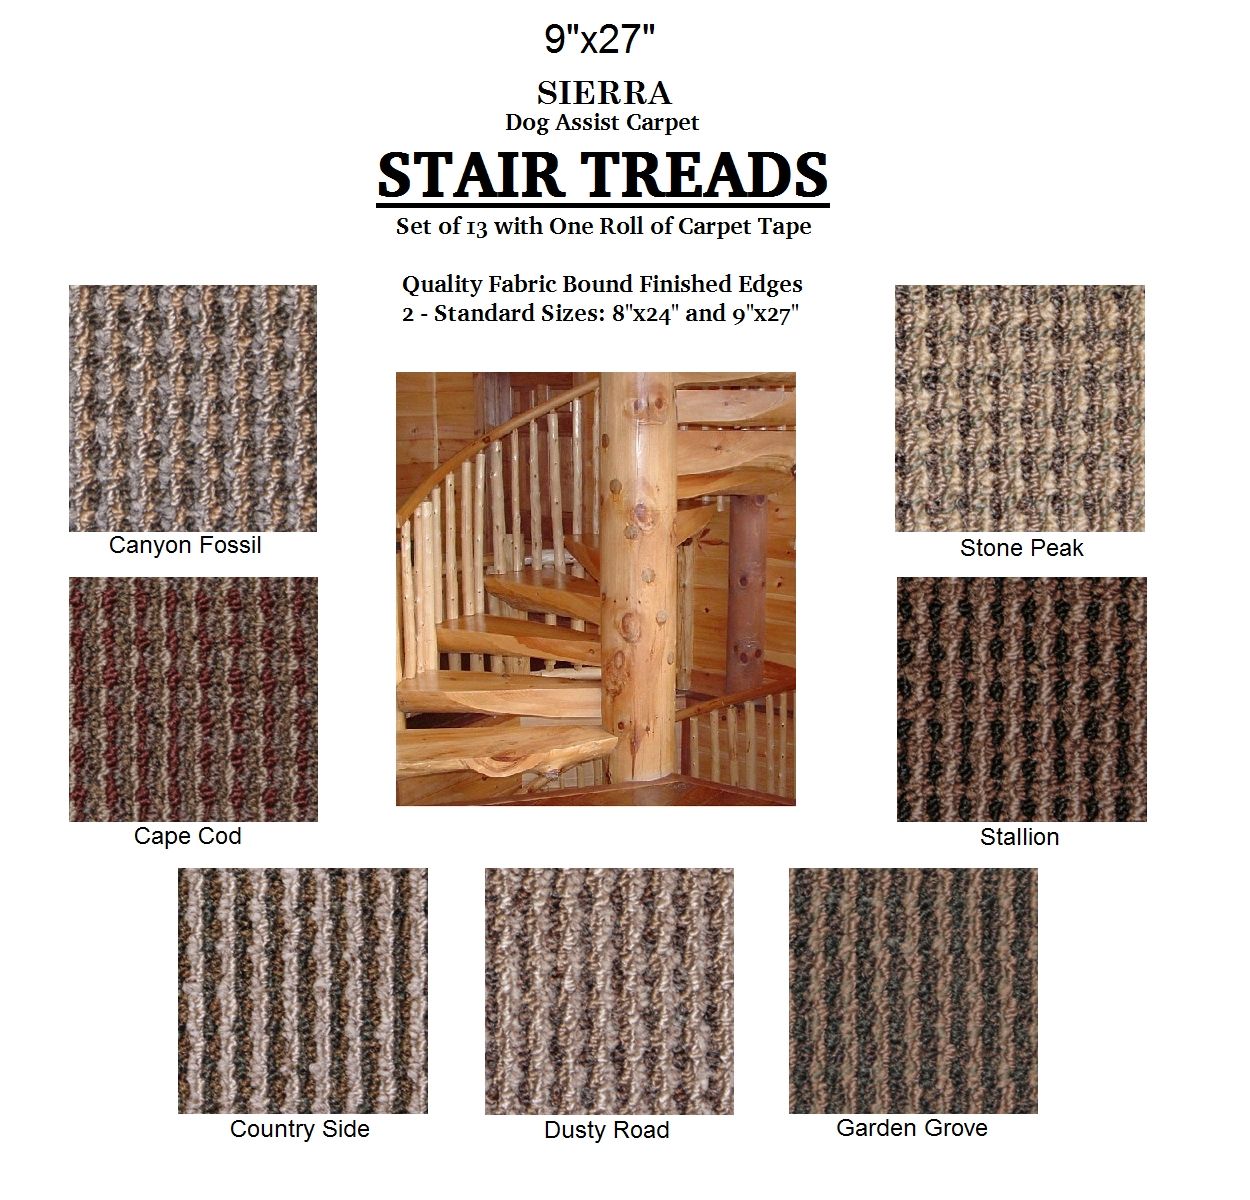 Ii Dog Assist Carpet Stair Treads In Fabric Stair Treads (View 5 of 20)